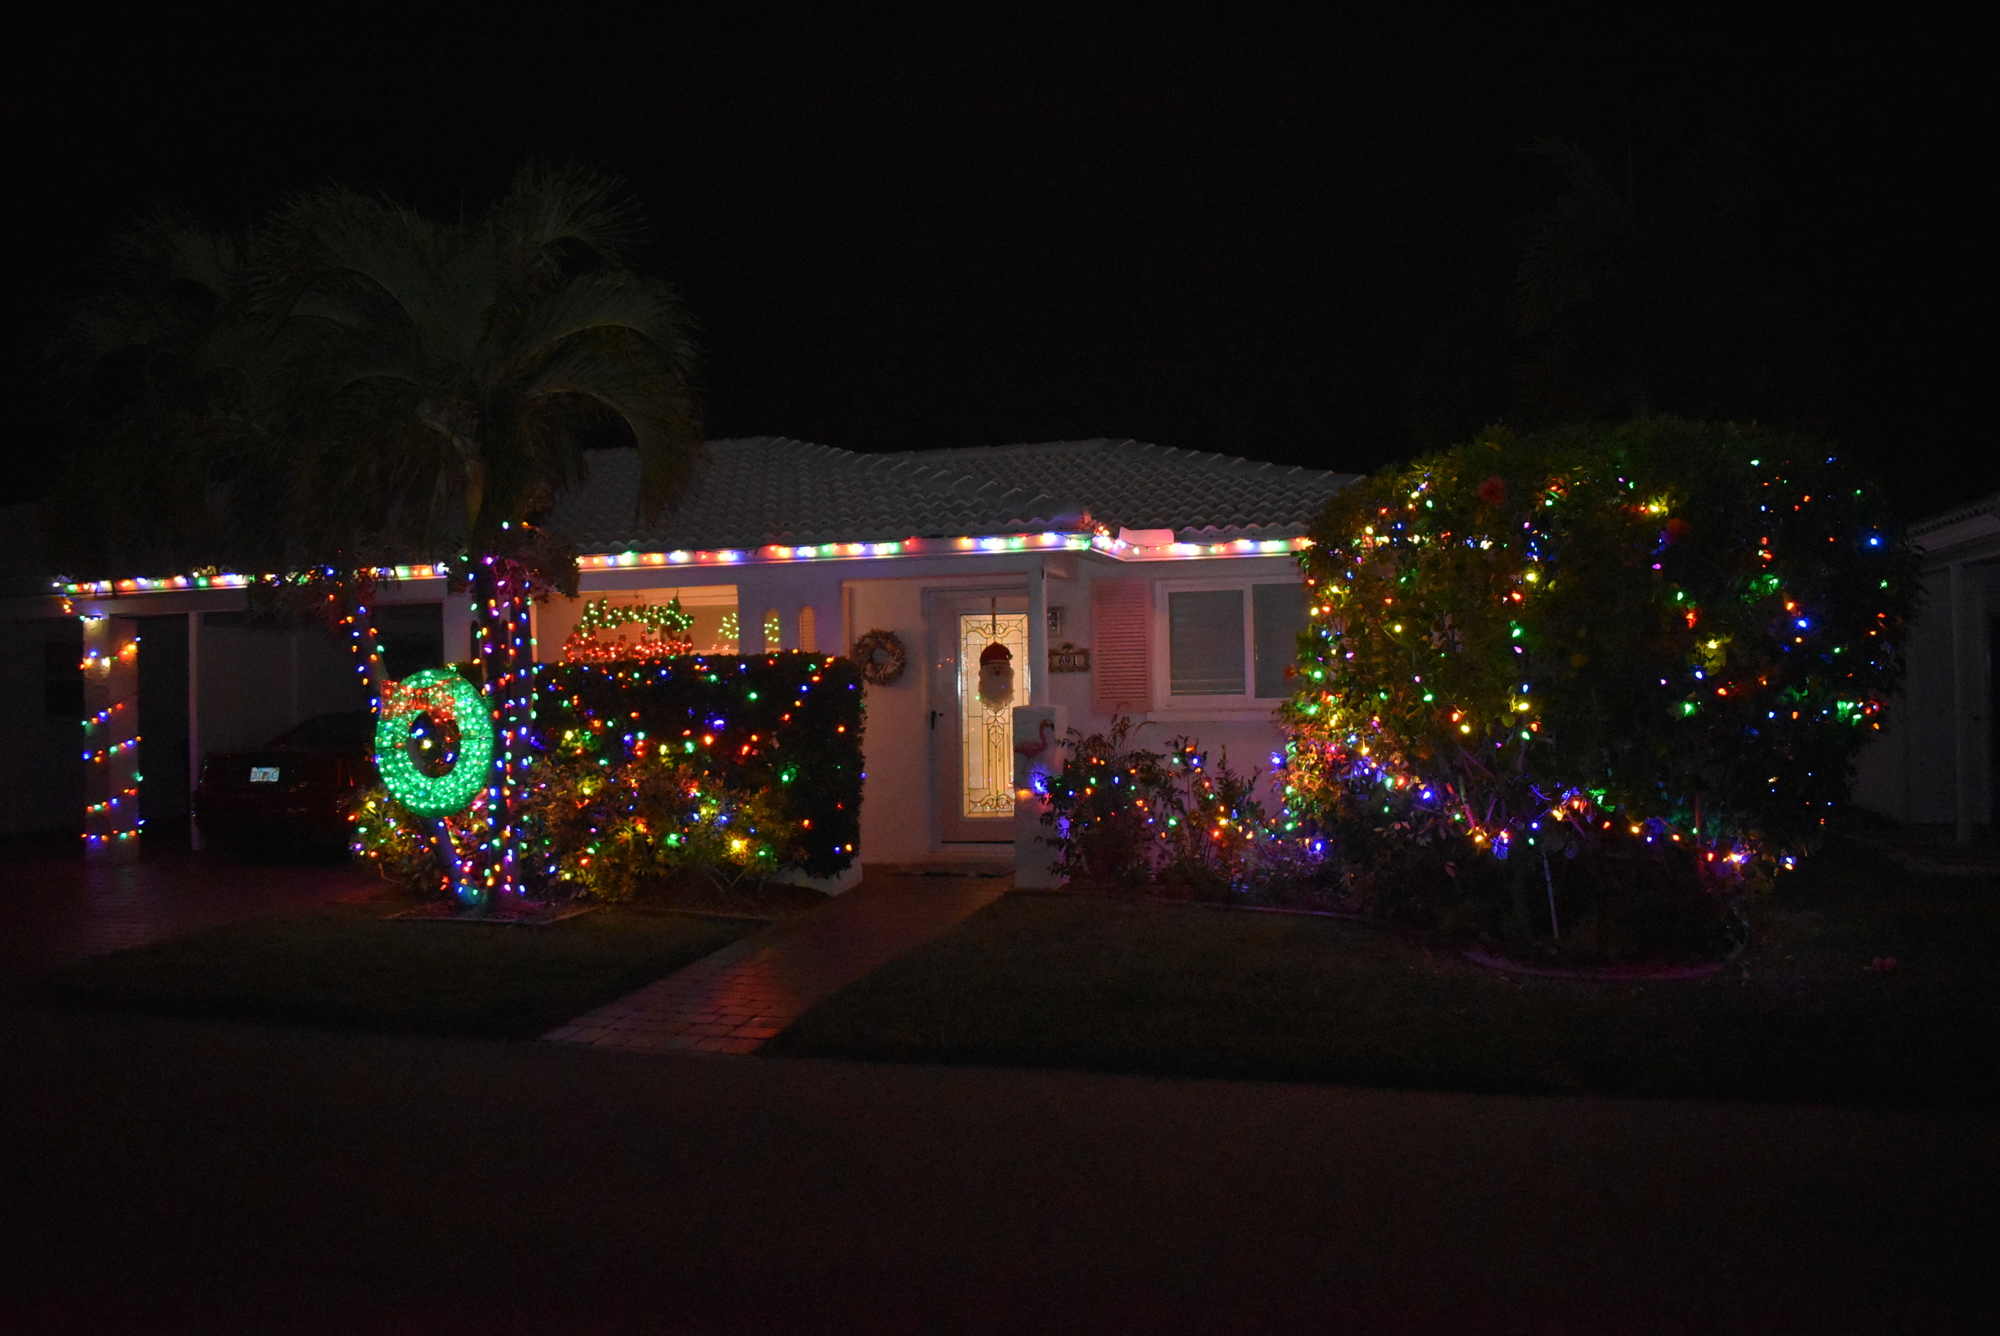 Bright bushes front this house on El Centro Drive.